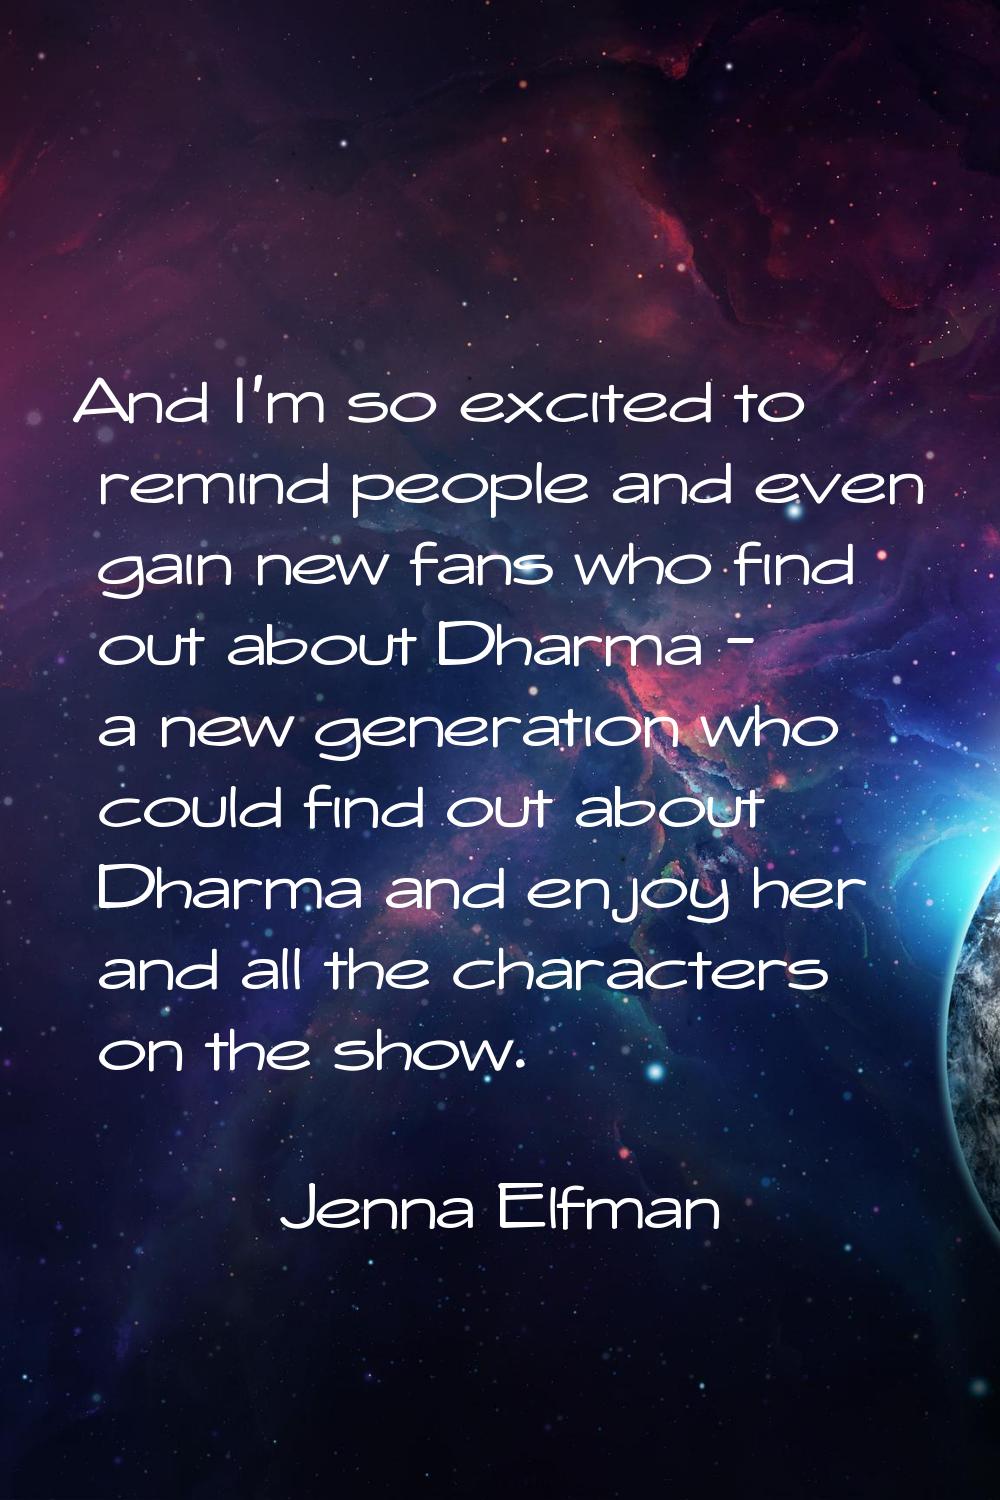 And I'm so excited to remind people and even gain new fans who find out about Dharma - a new genera